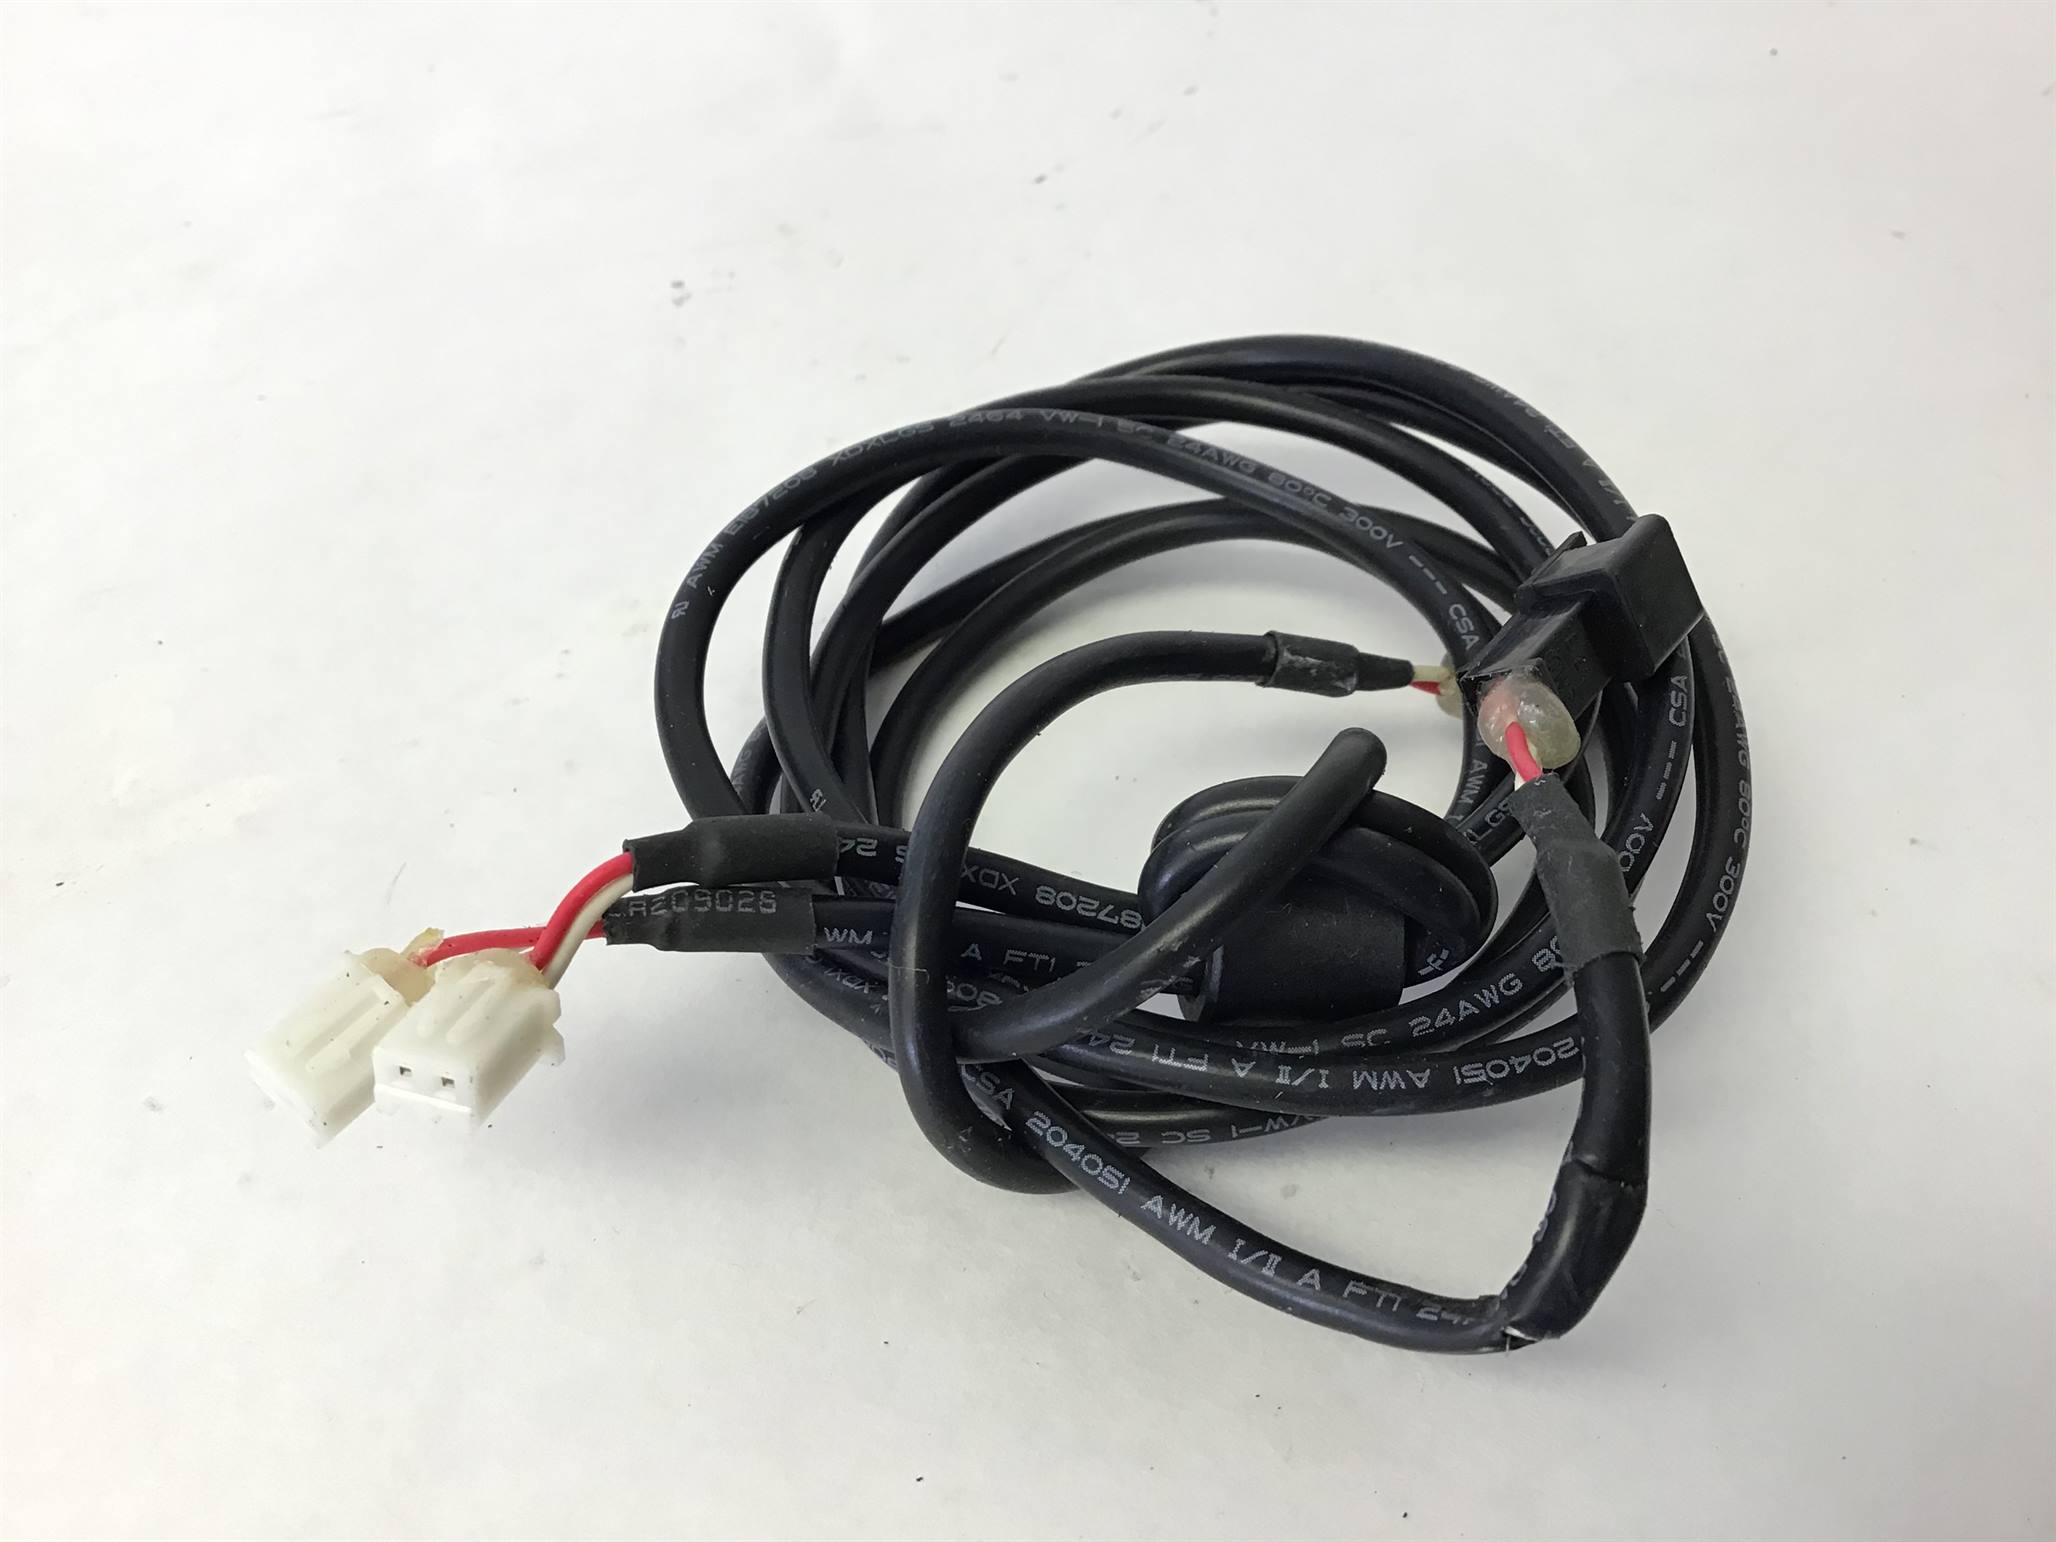 Grip Pulse Wires-from Grip Pulse to HR Receiver (Used)